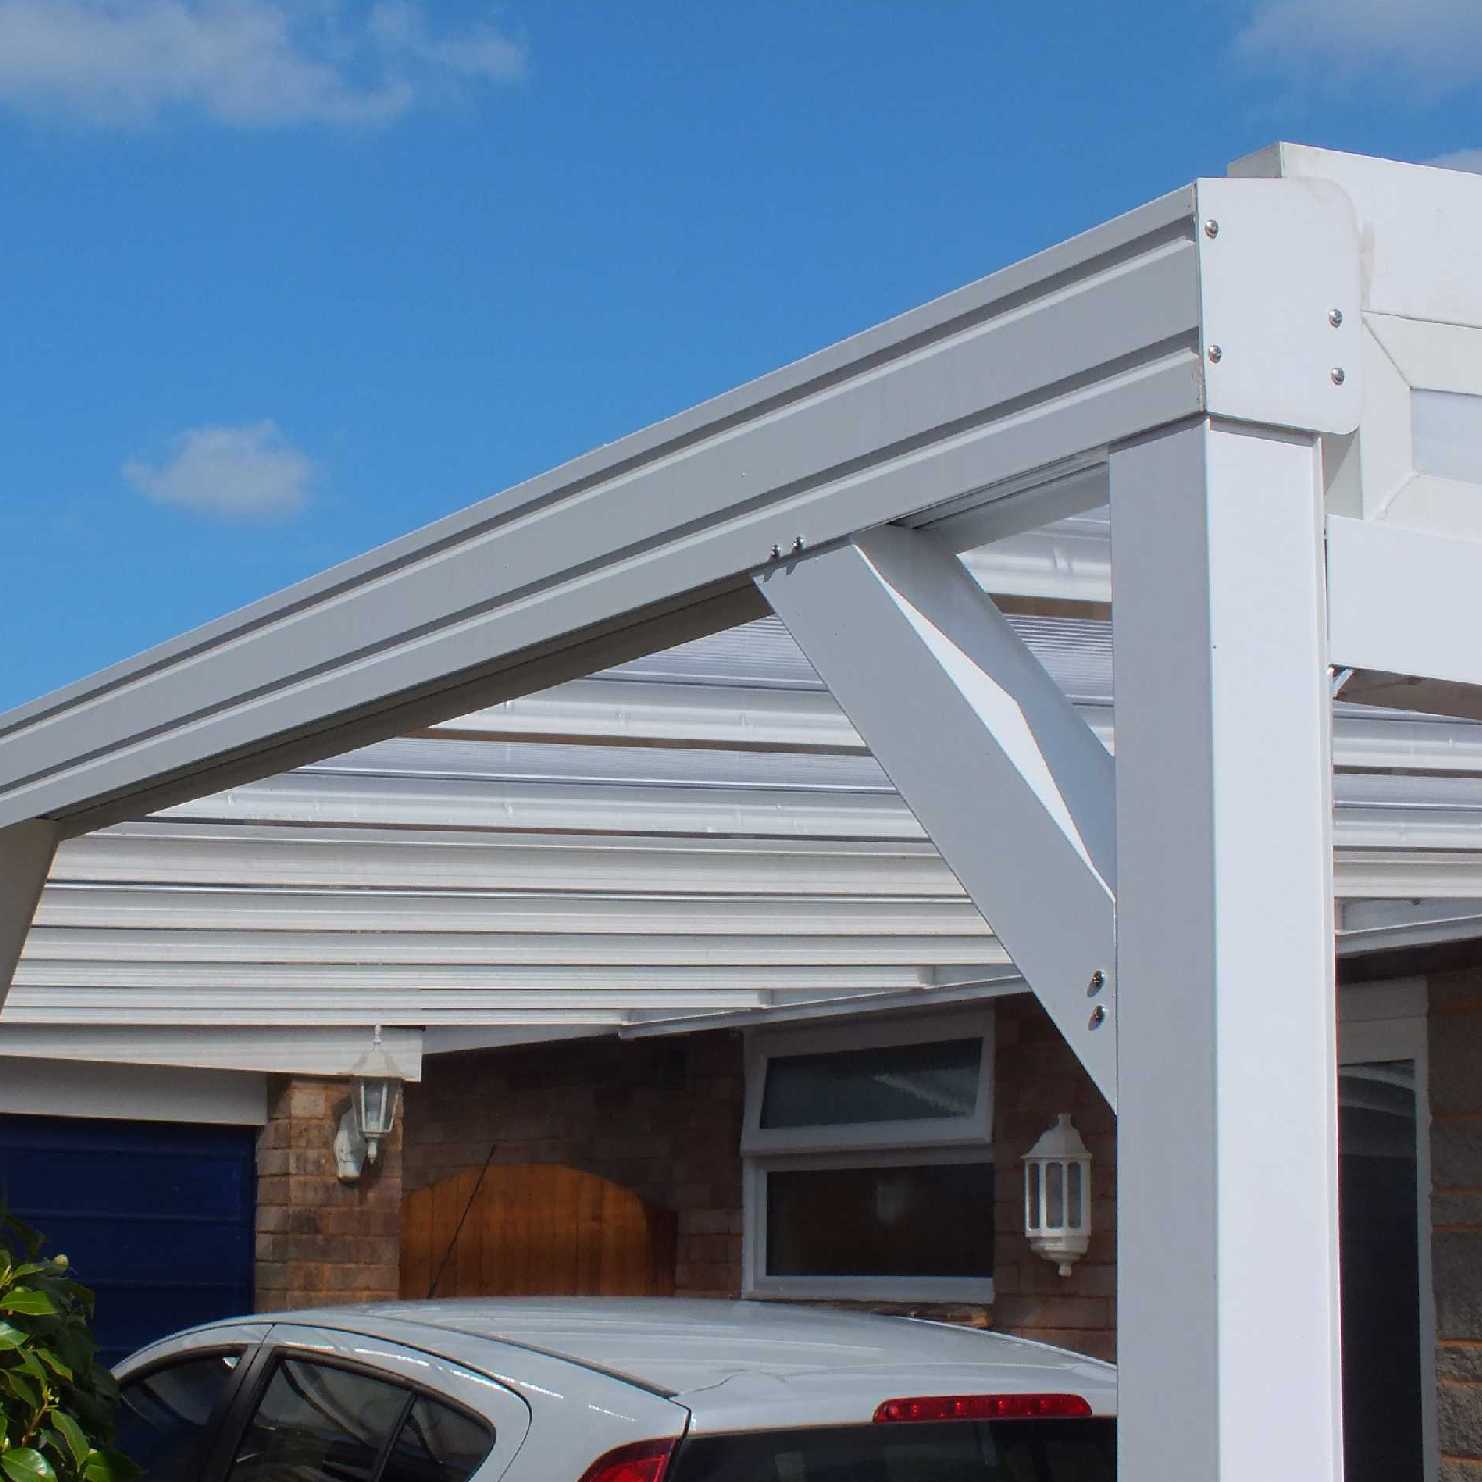 Great deals on Omega Smart Lean-To Canopy, White with 16mm Polycarbonate Glazing - 7.8m (W) x 4.0m (P), (4) Supporting Posts